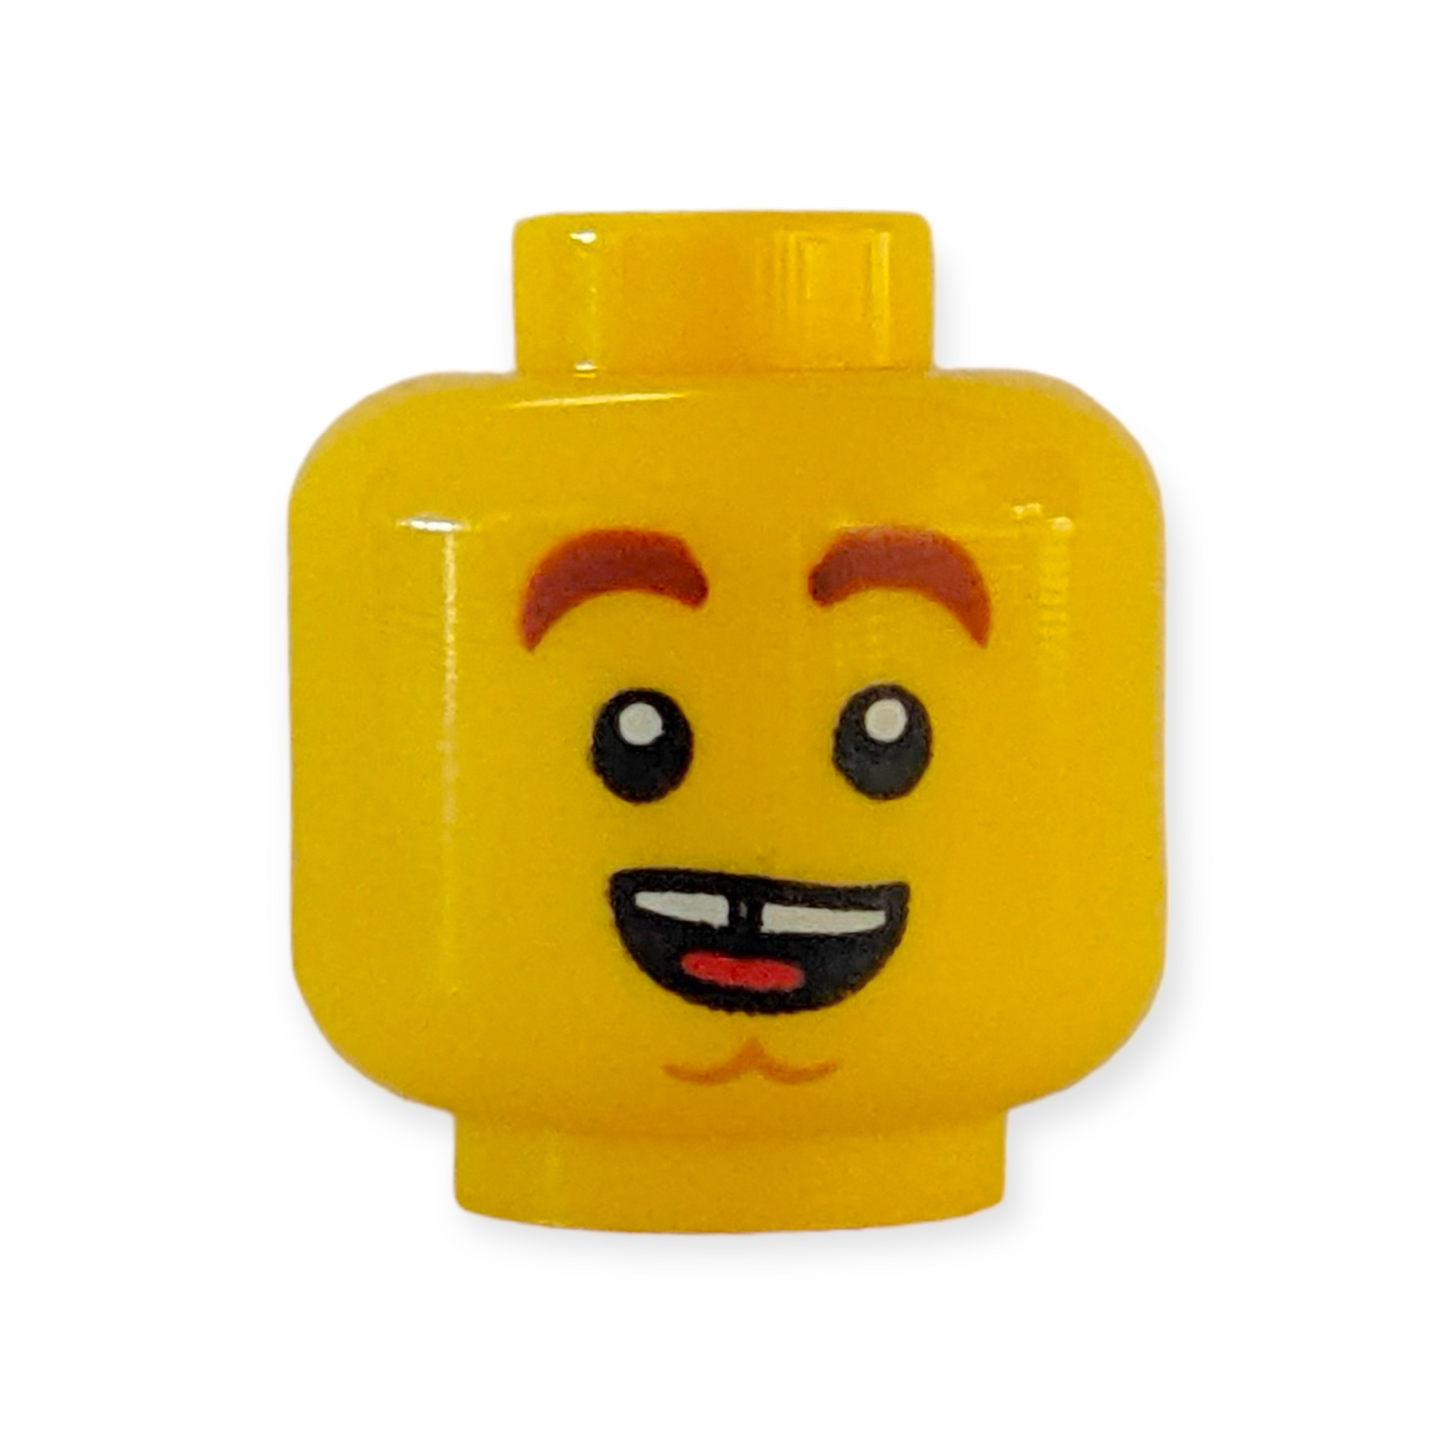 LEGO Head - 3163 Dual Sided Reddish Brown Thick Eyebrows, Chin Dimple, Open Mouth Smile